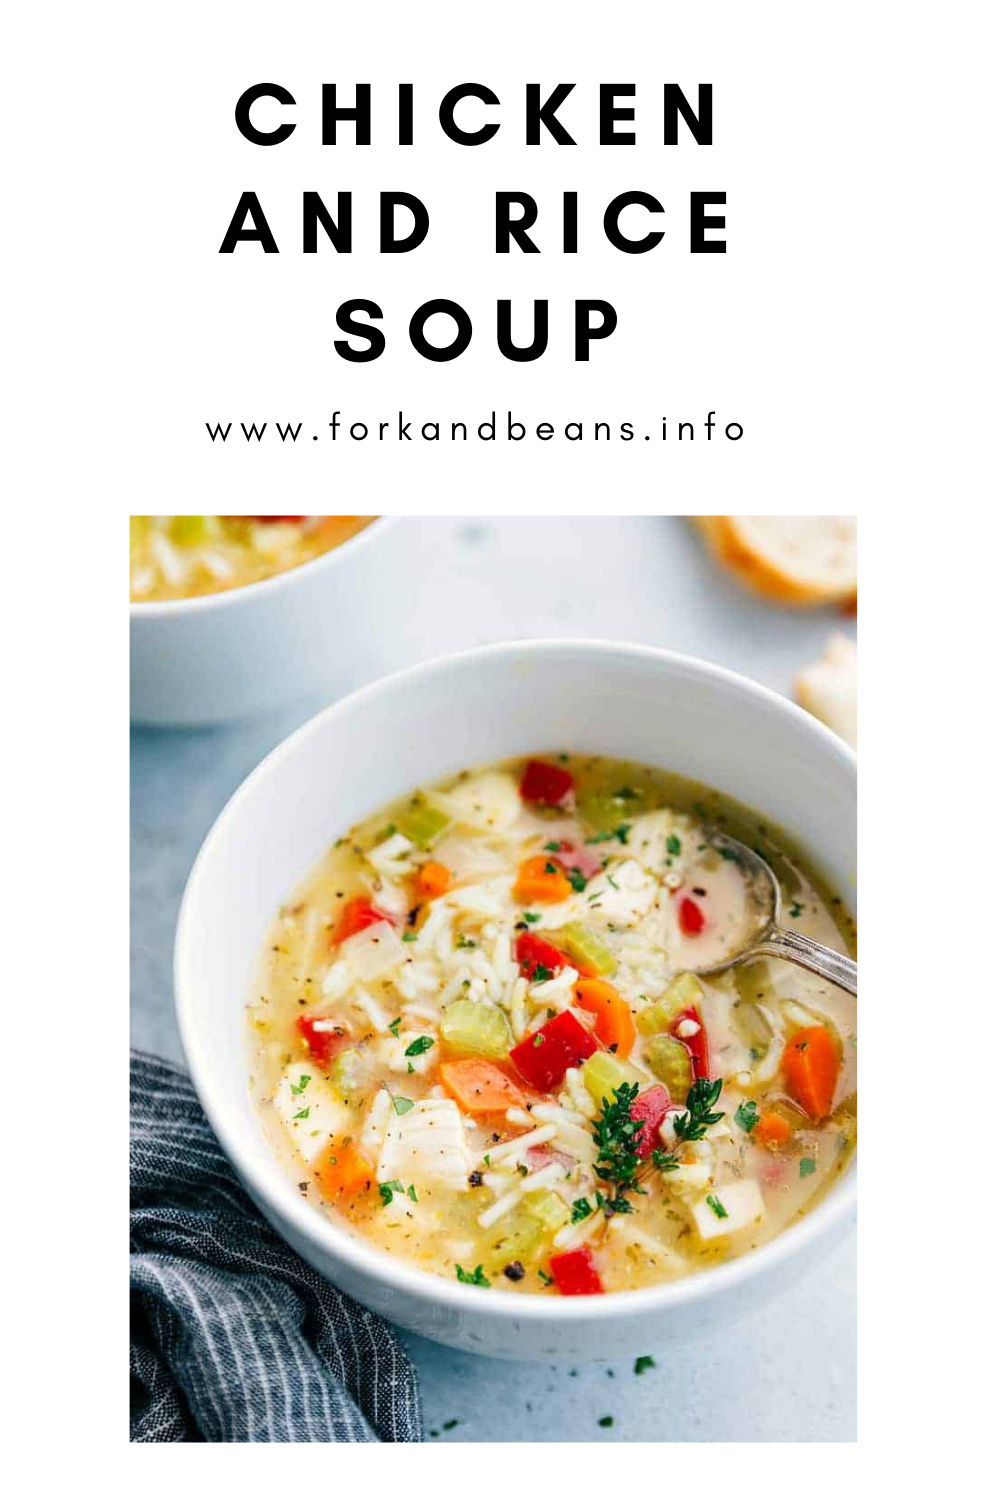 EASY AND QUICK CHICKEN RICE SOUP